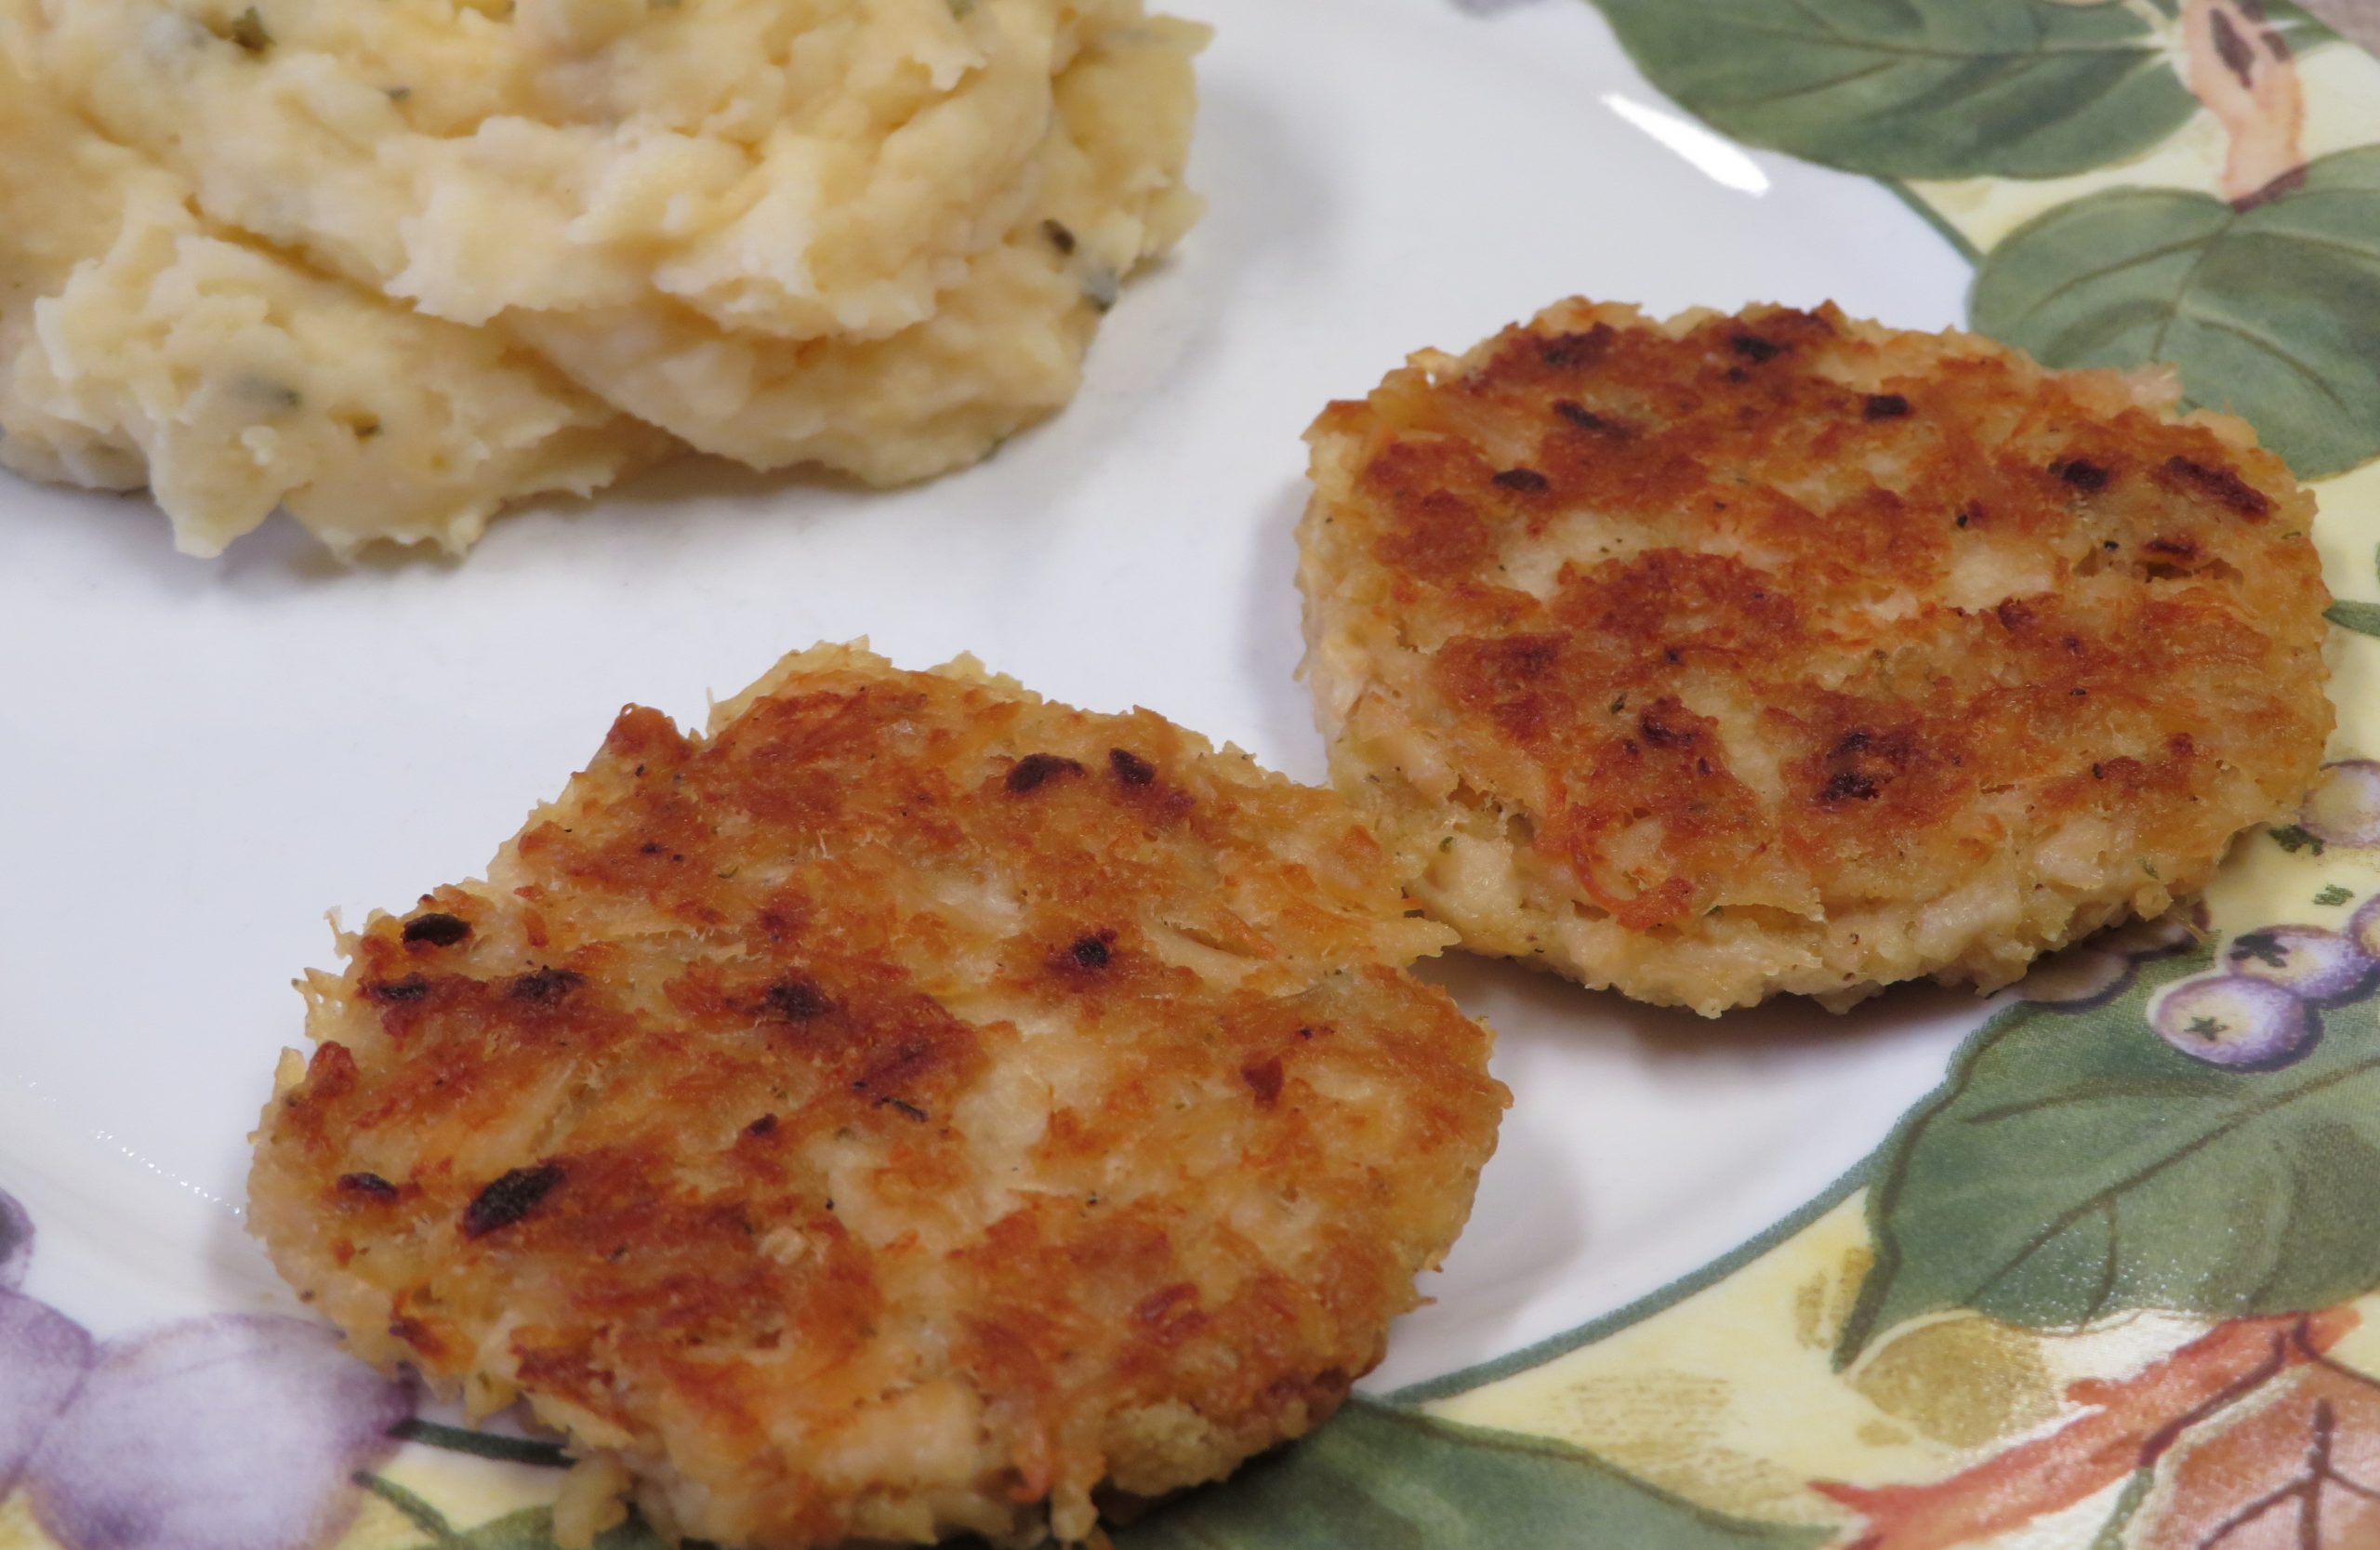 Two Chicken Patties on a plate with Mashed Potato Salad